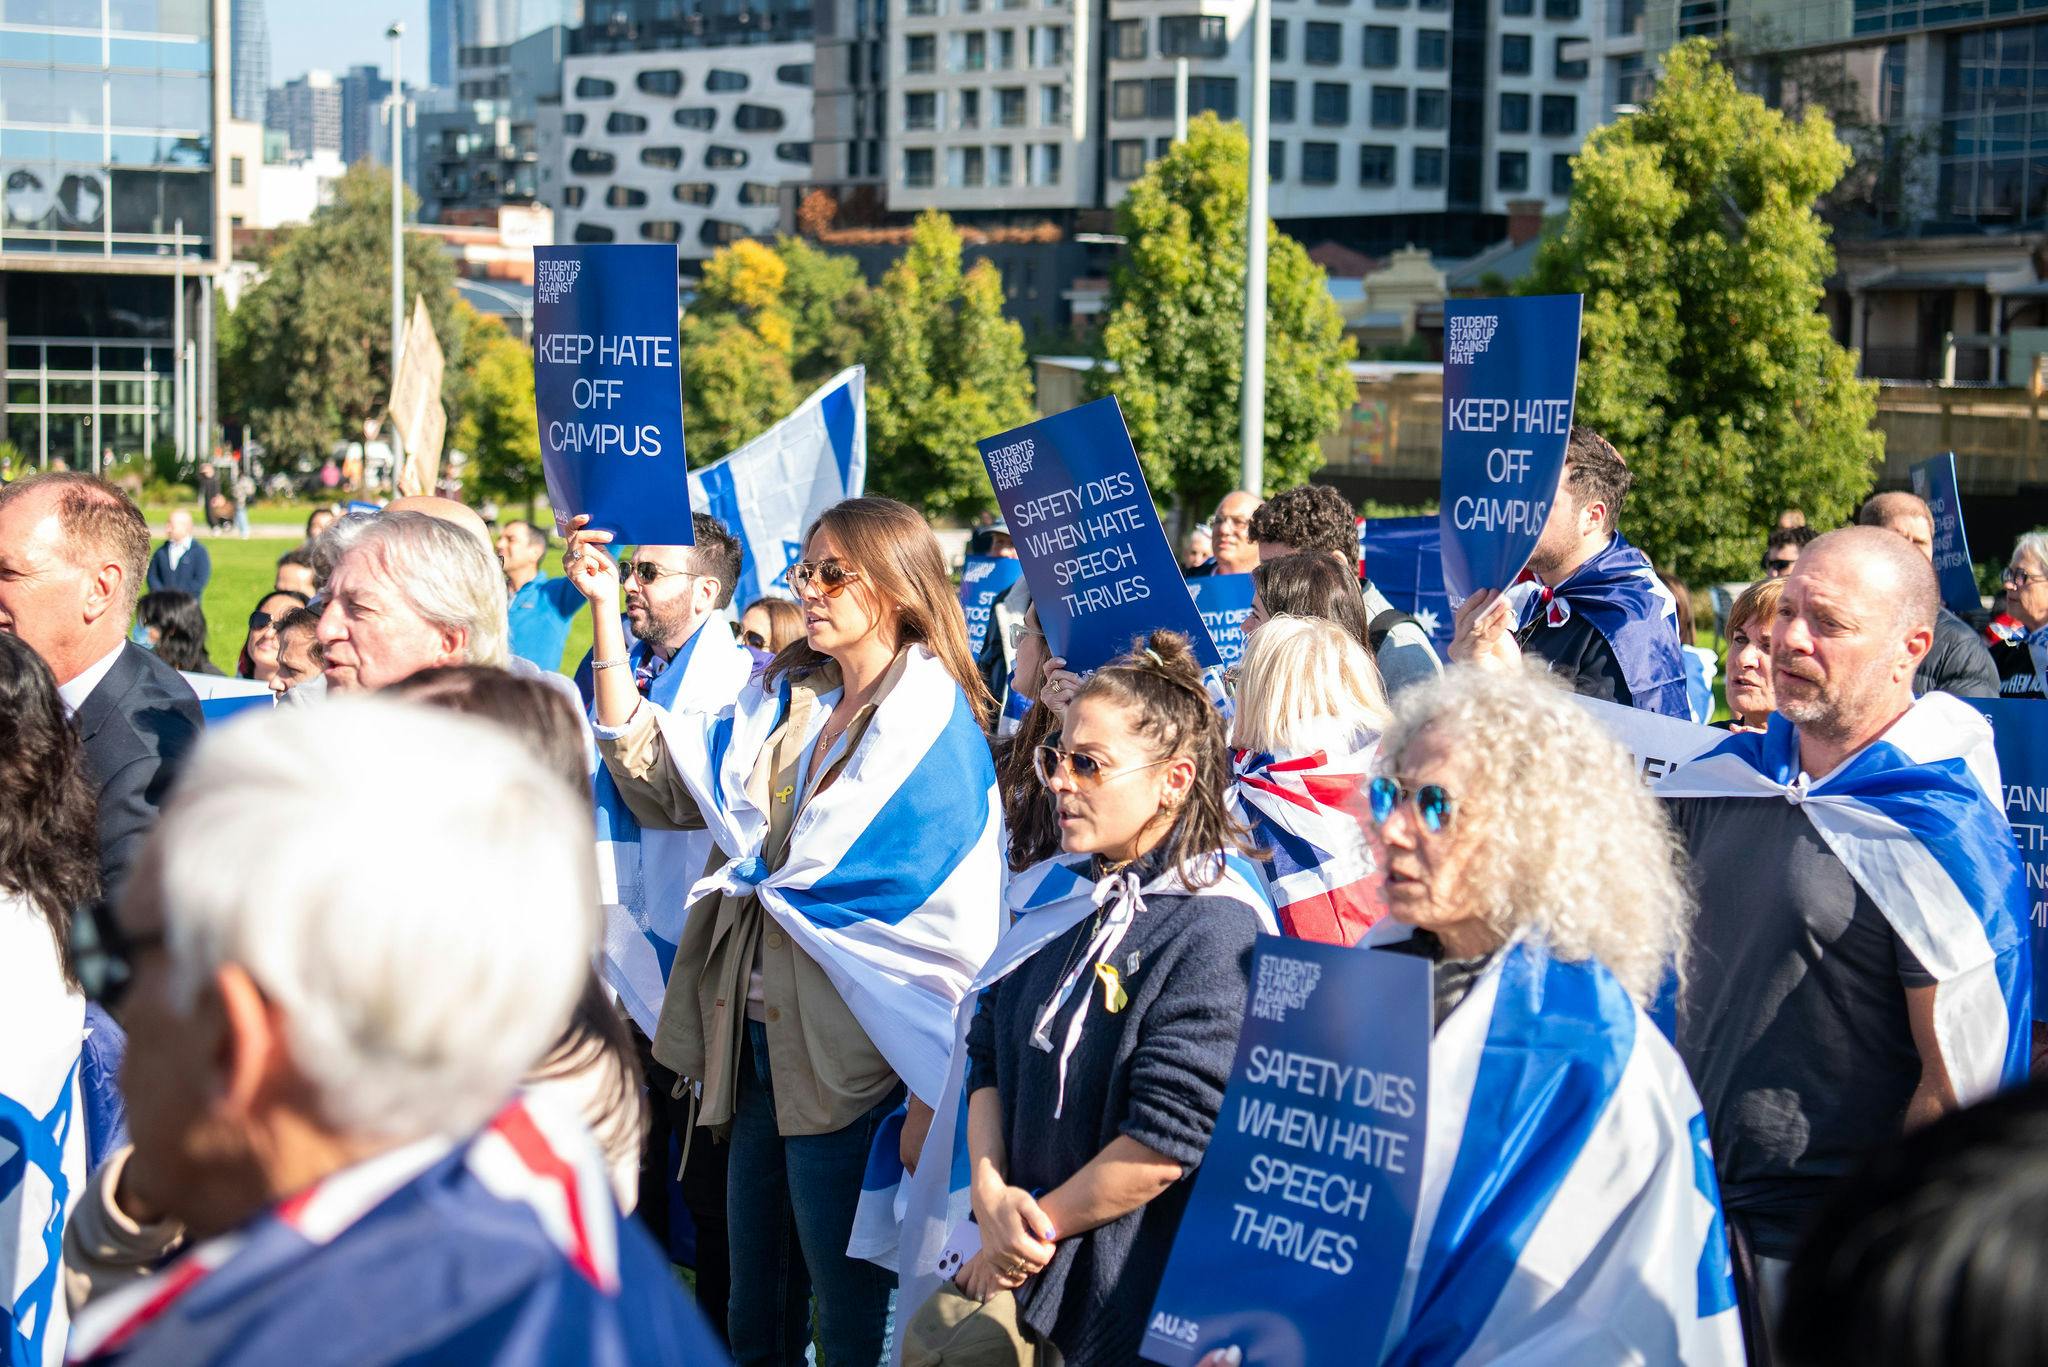 Rally against antisemitism at Melbourne University